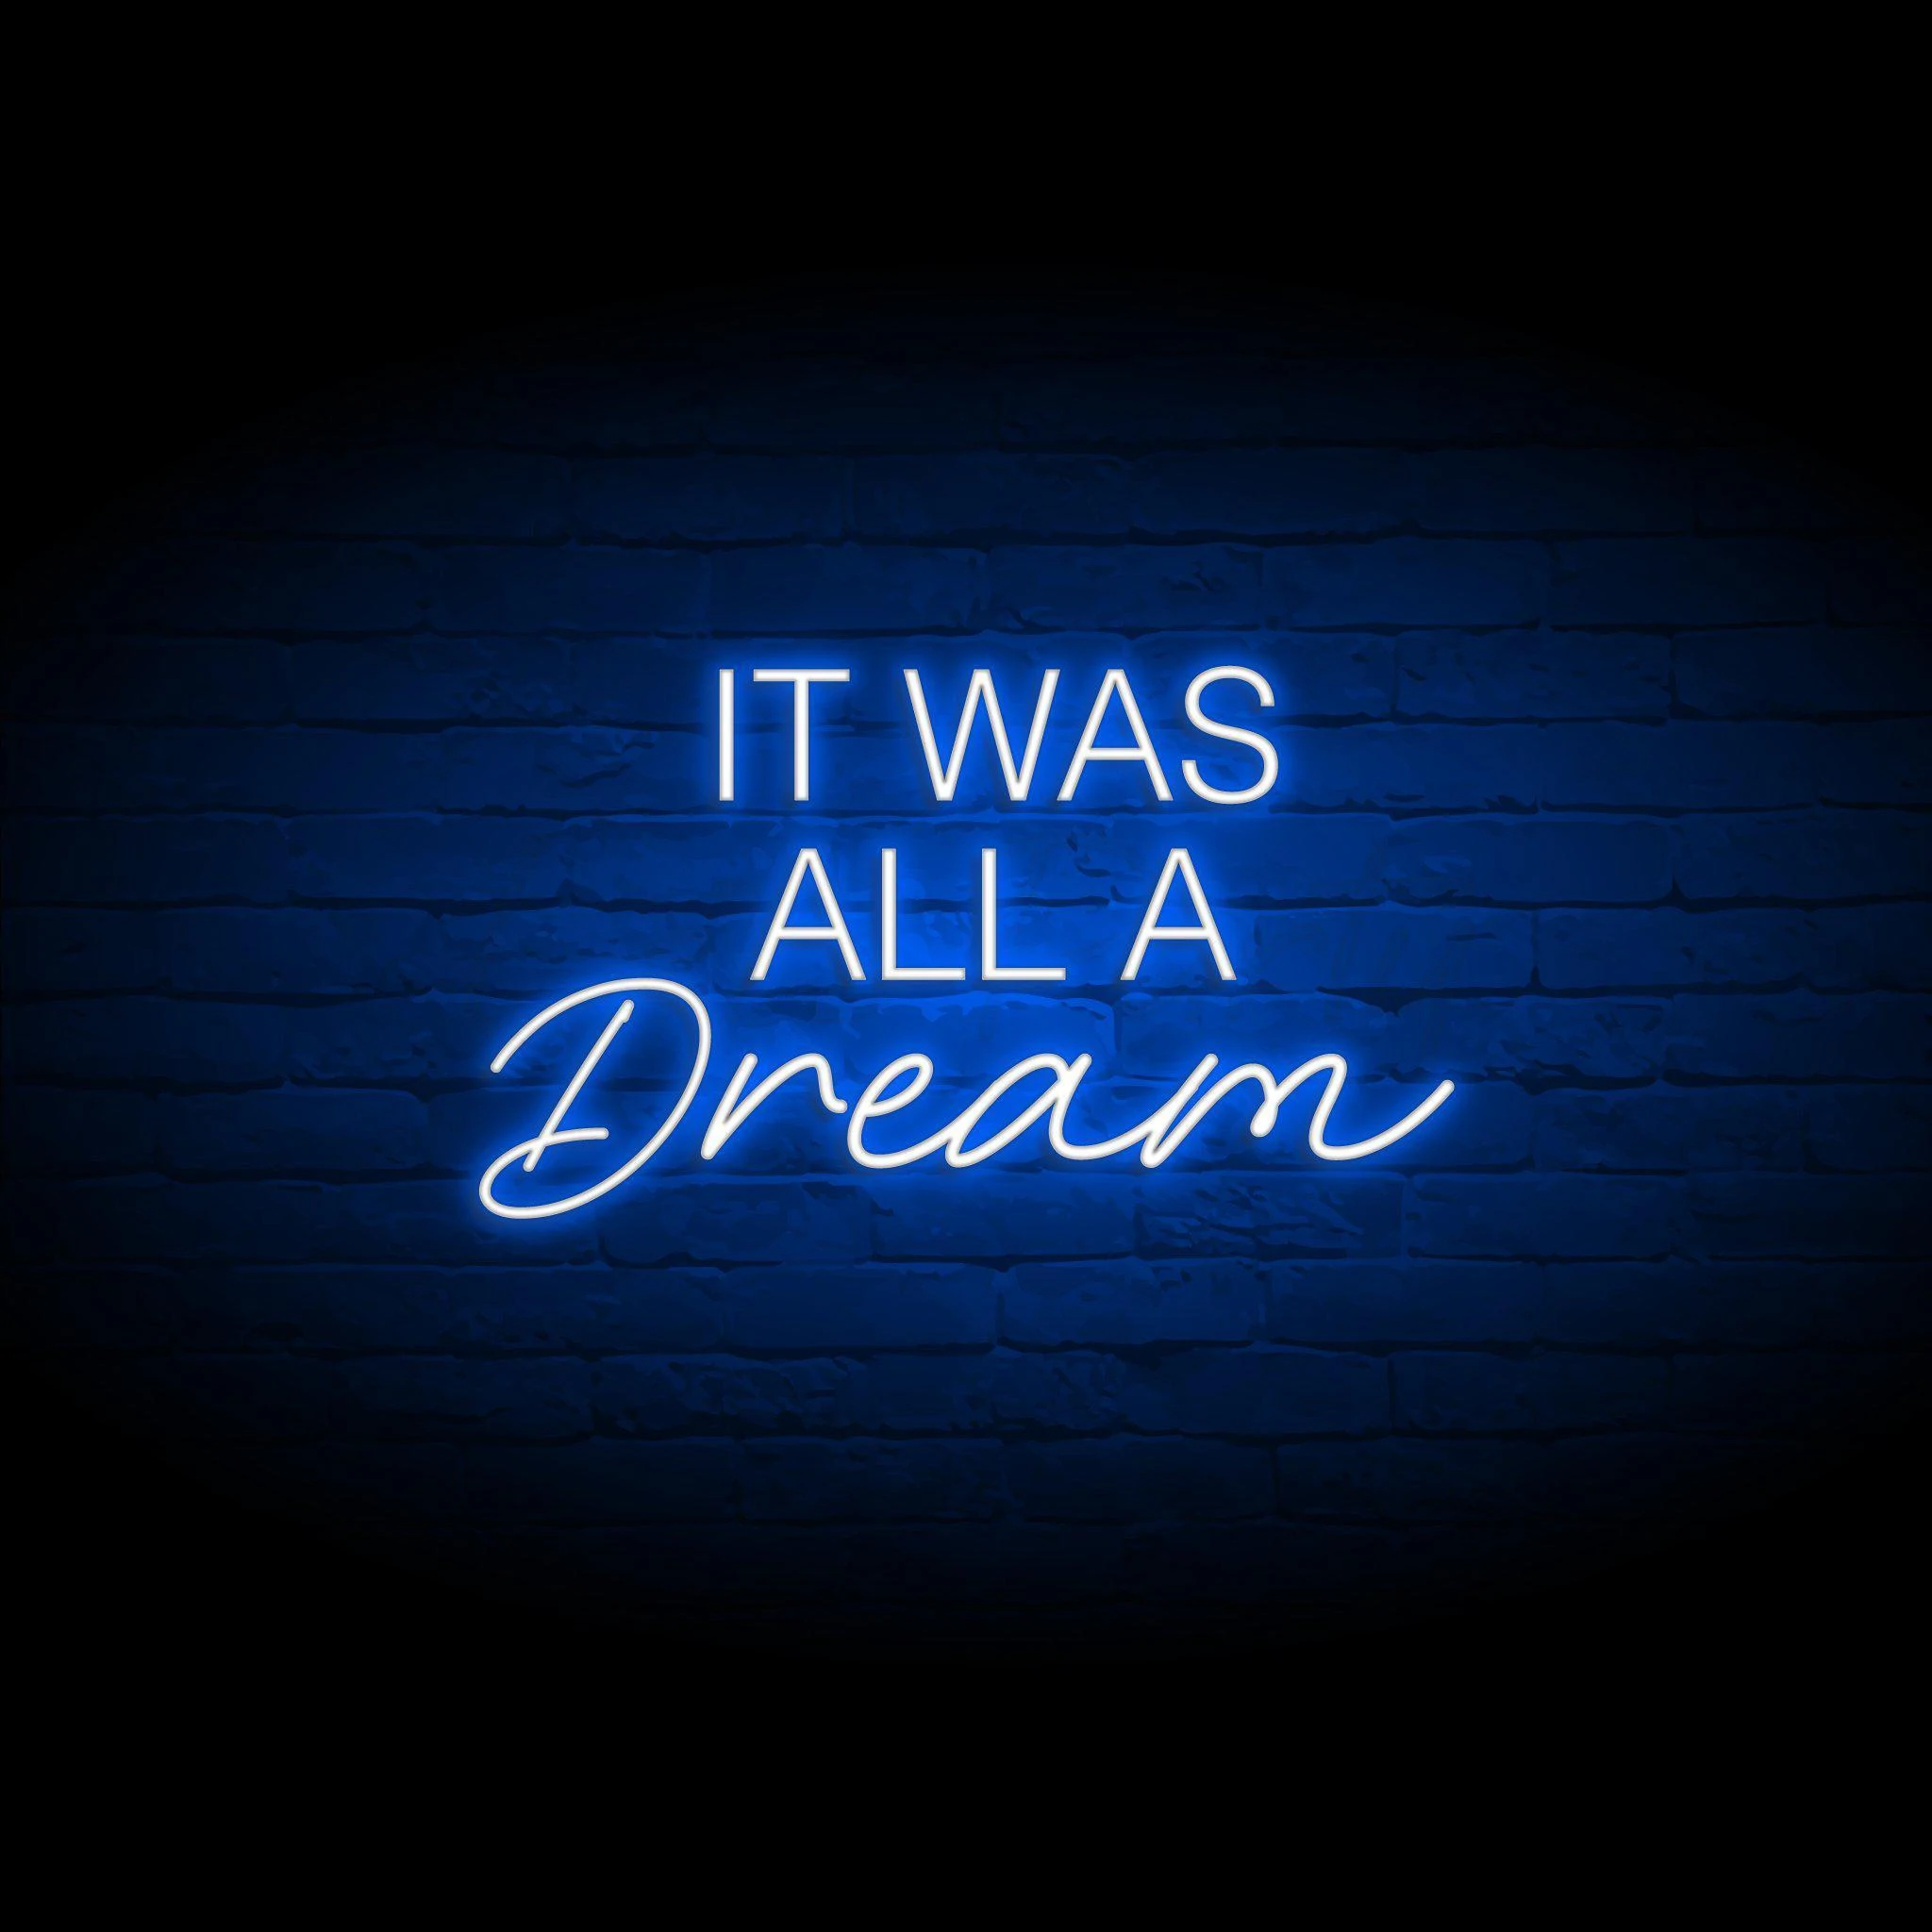 'IT WAS ALL A DREAM' NEON SIGN